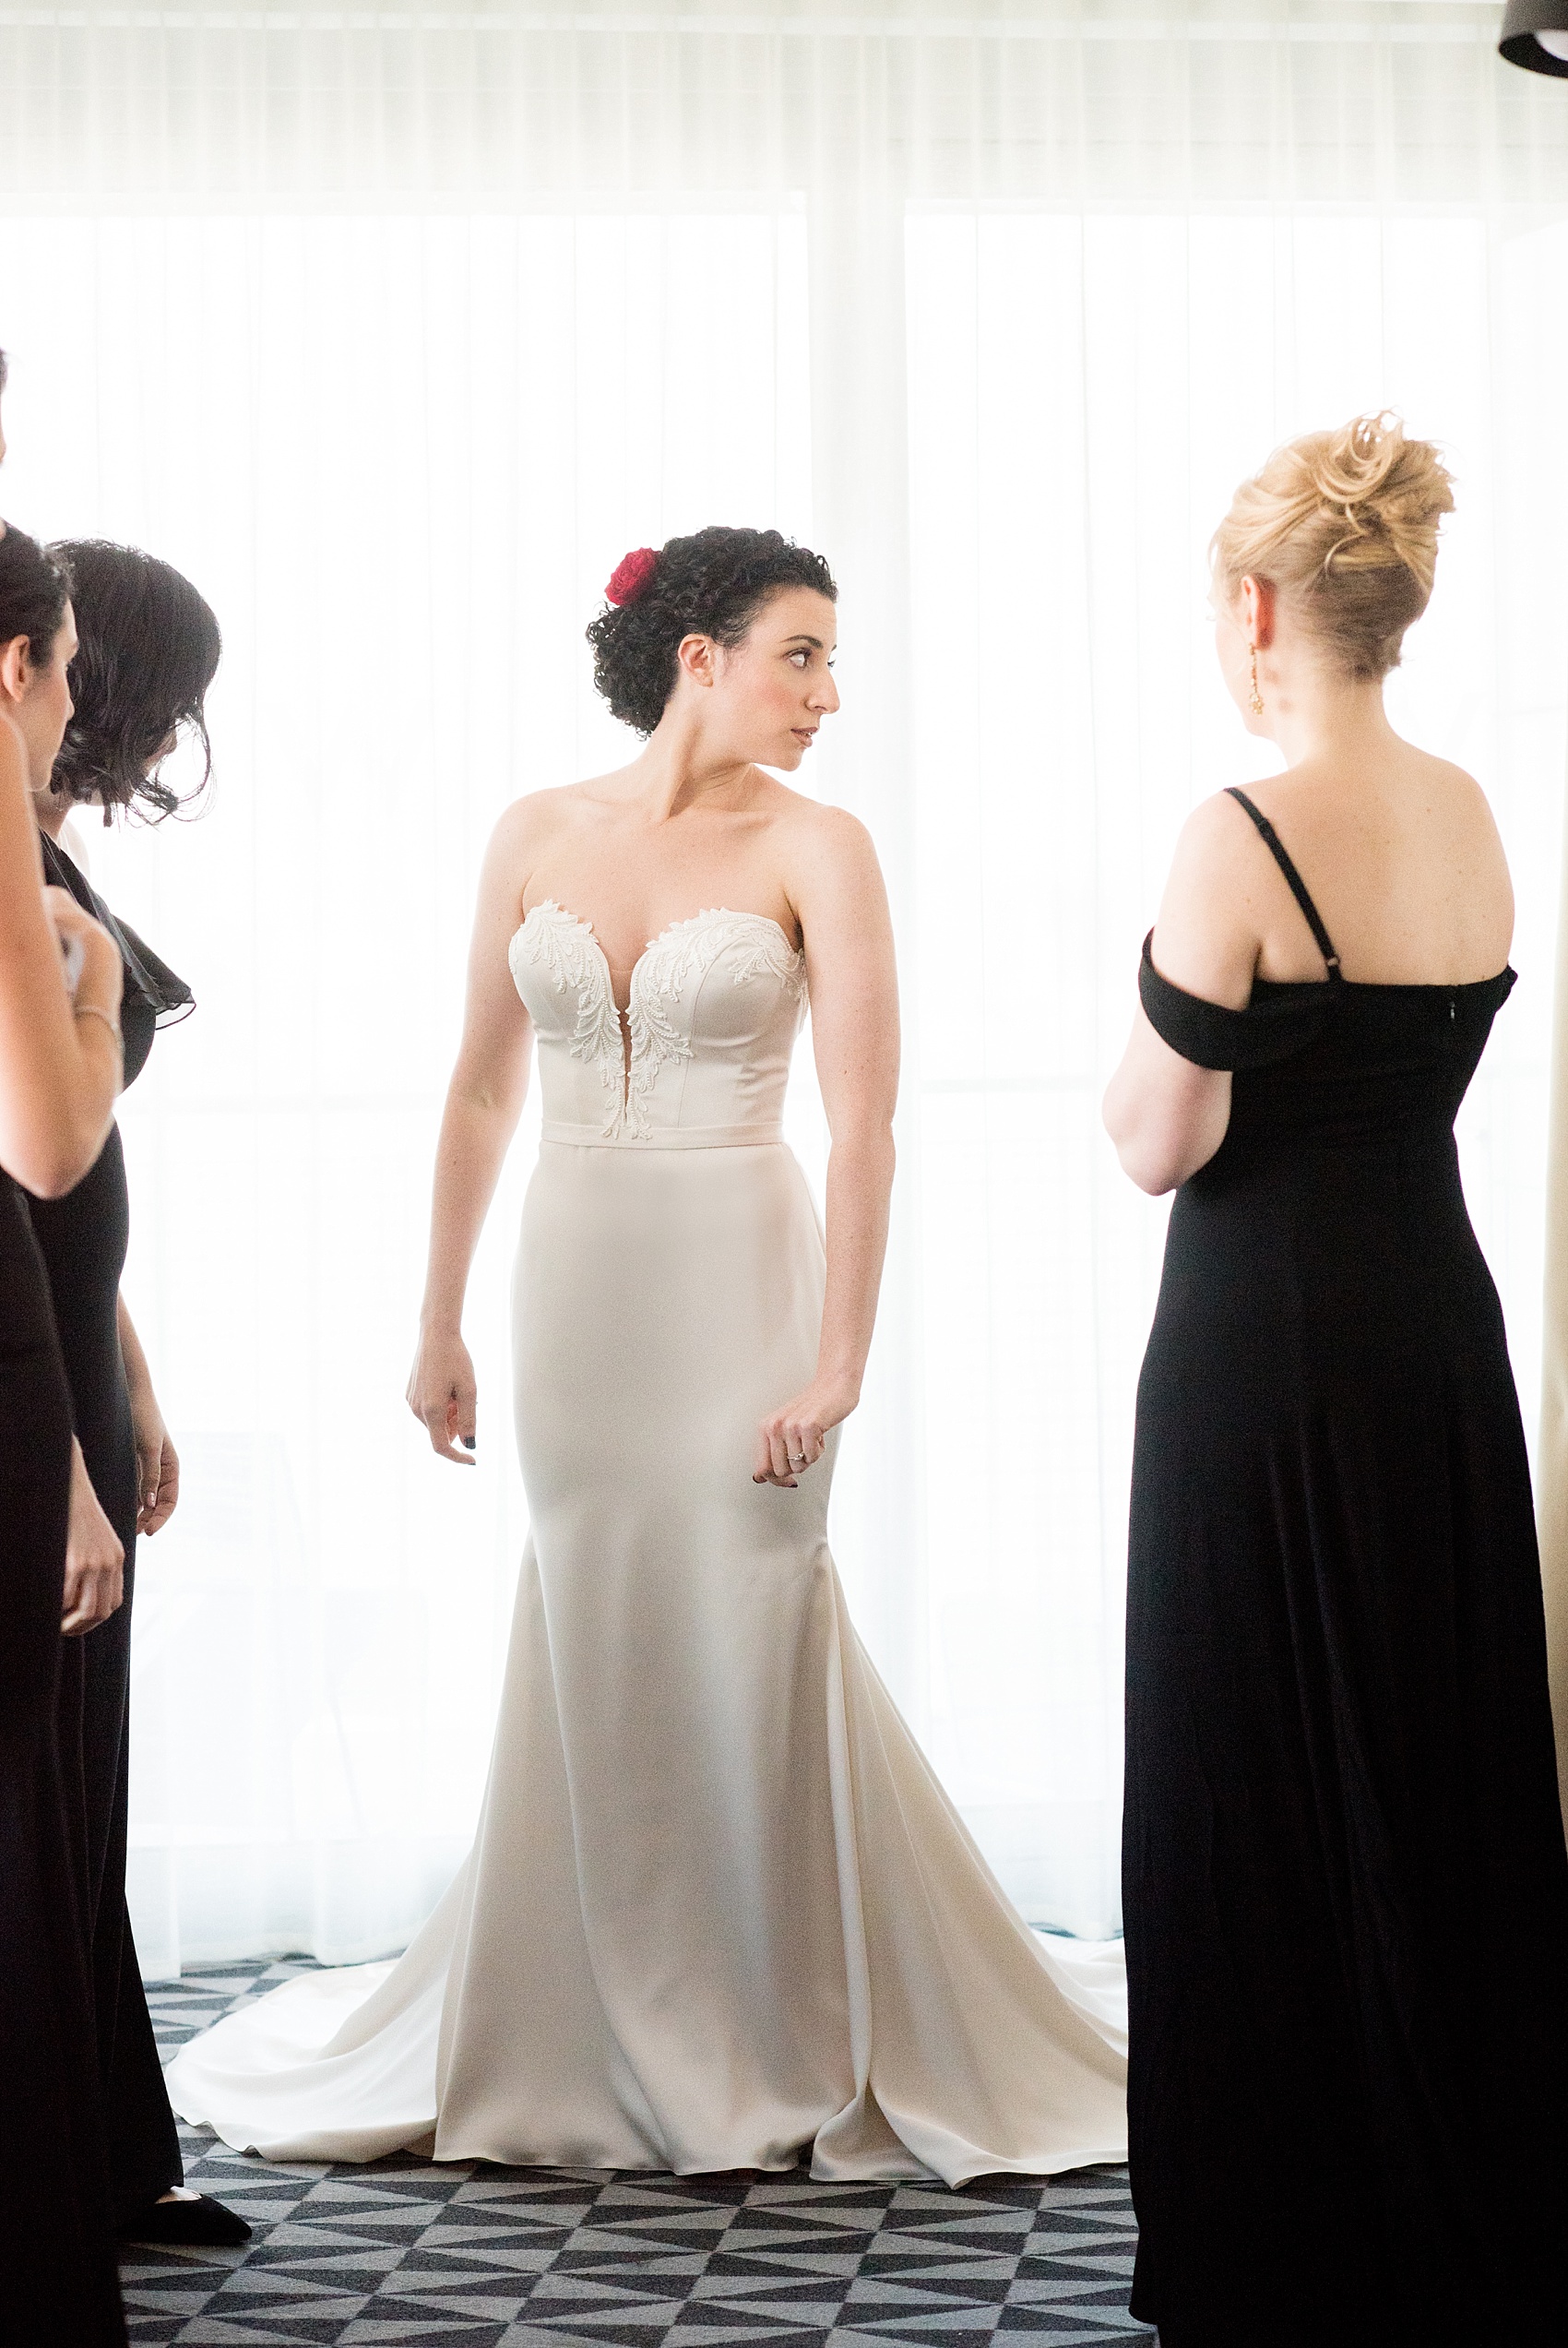 W Hoboken wedding photos by Mikkel Paige Photography. Picture of the bride getting into her Paloma Blanca, strapless pearl beaded wedding gown with her bridesmaids. #mikkelpaige #HobokenWedding #NewJerseyPhotographer #NewYorkCityPhotographer #NYCweddingphotographer #brideandgroomphotos #redpeonies #romanticwedding #springwedding #CityWedding